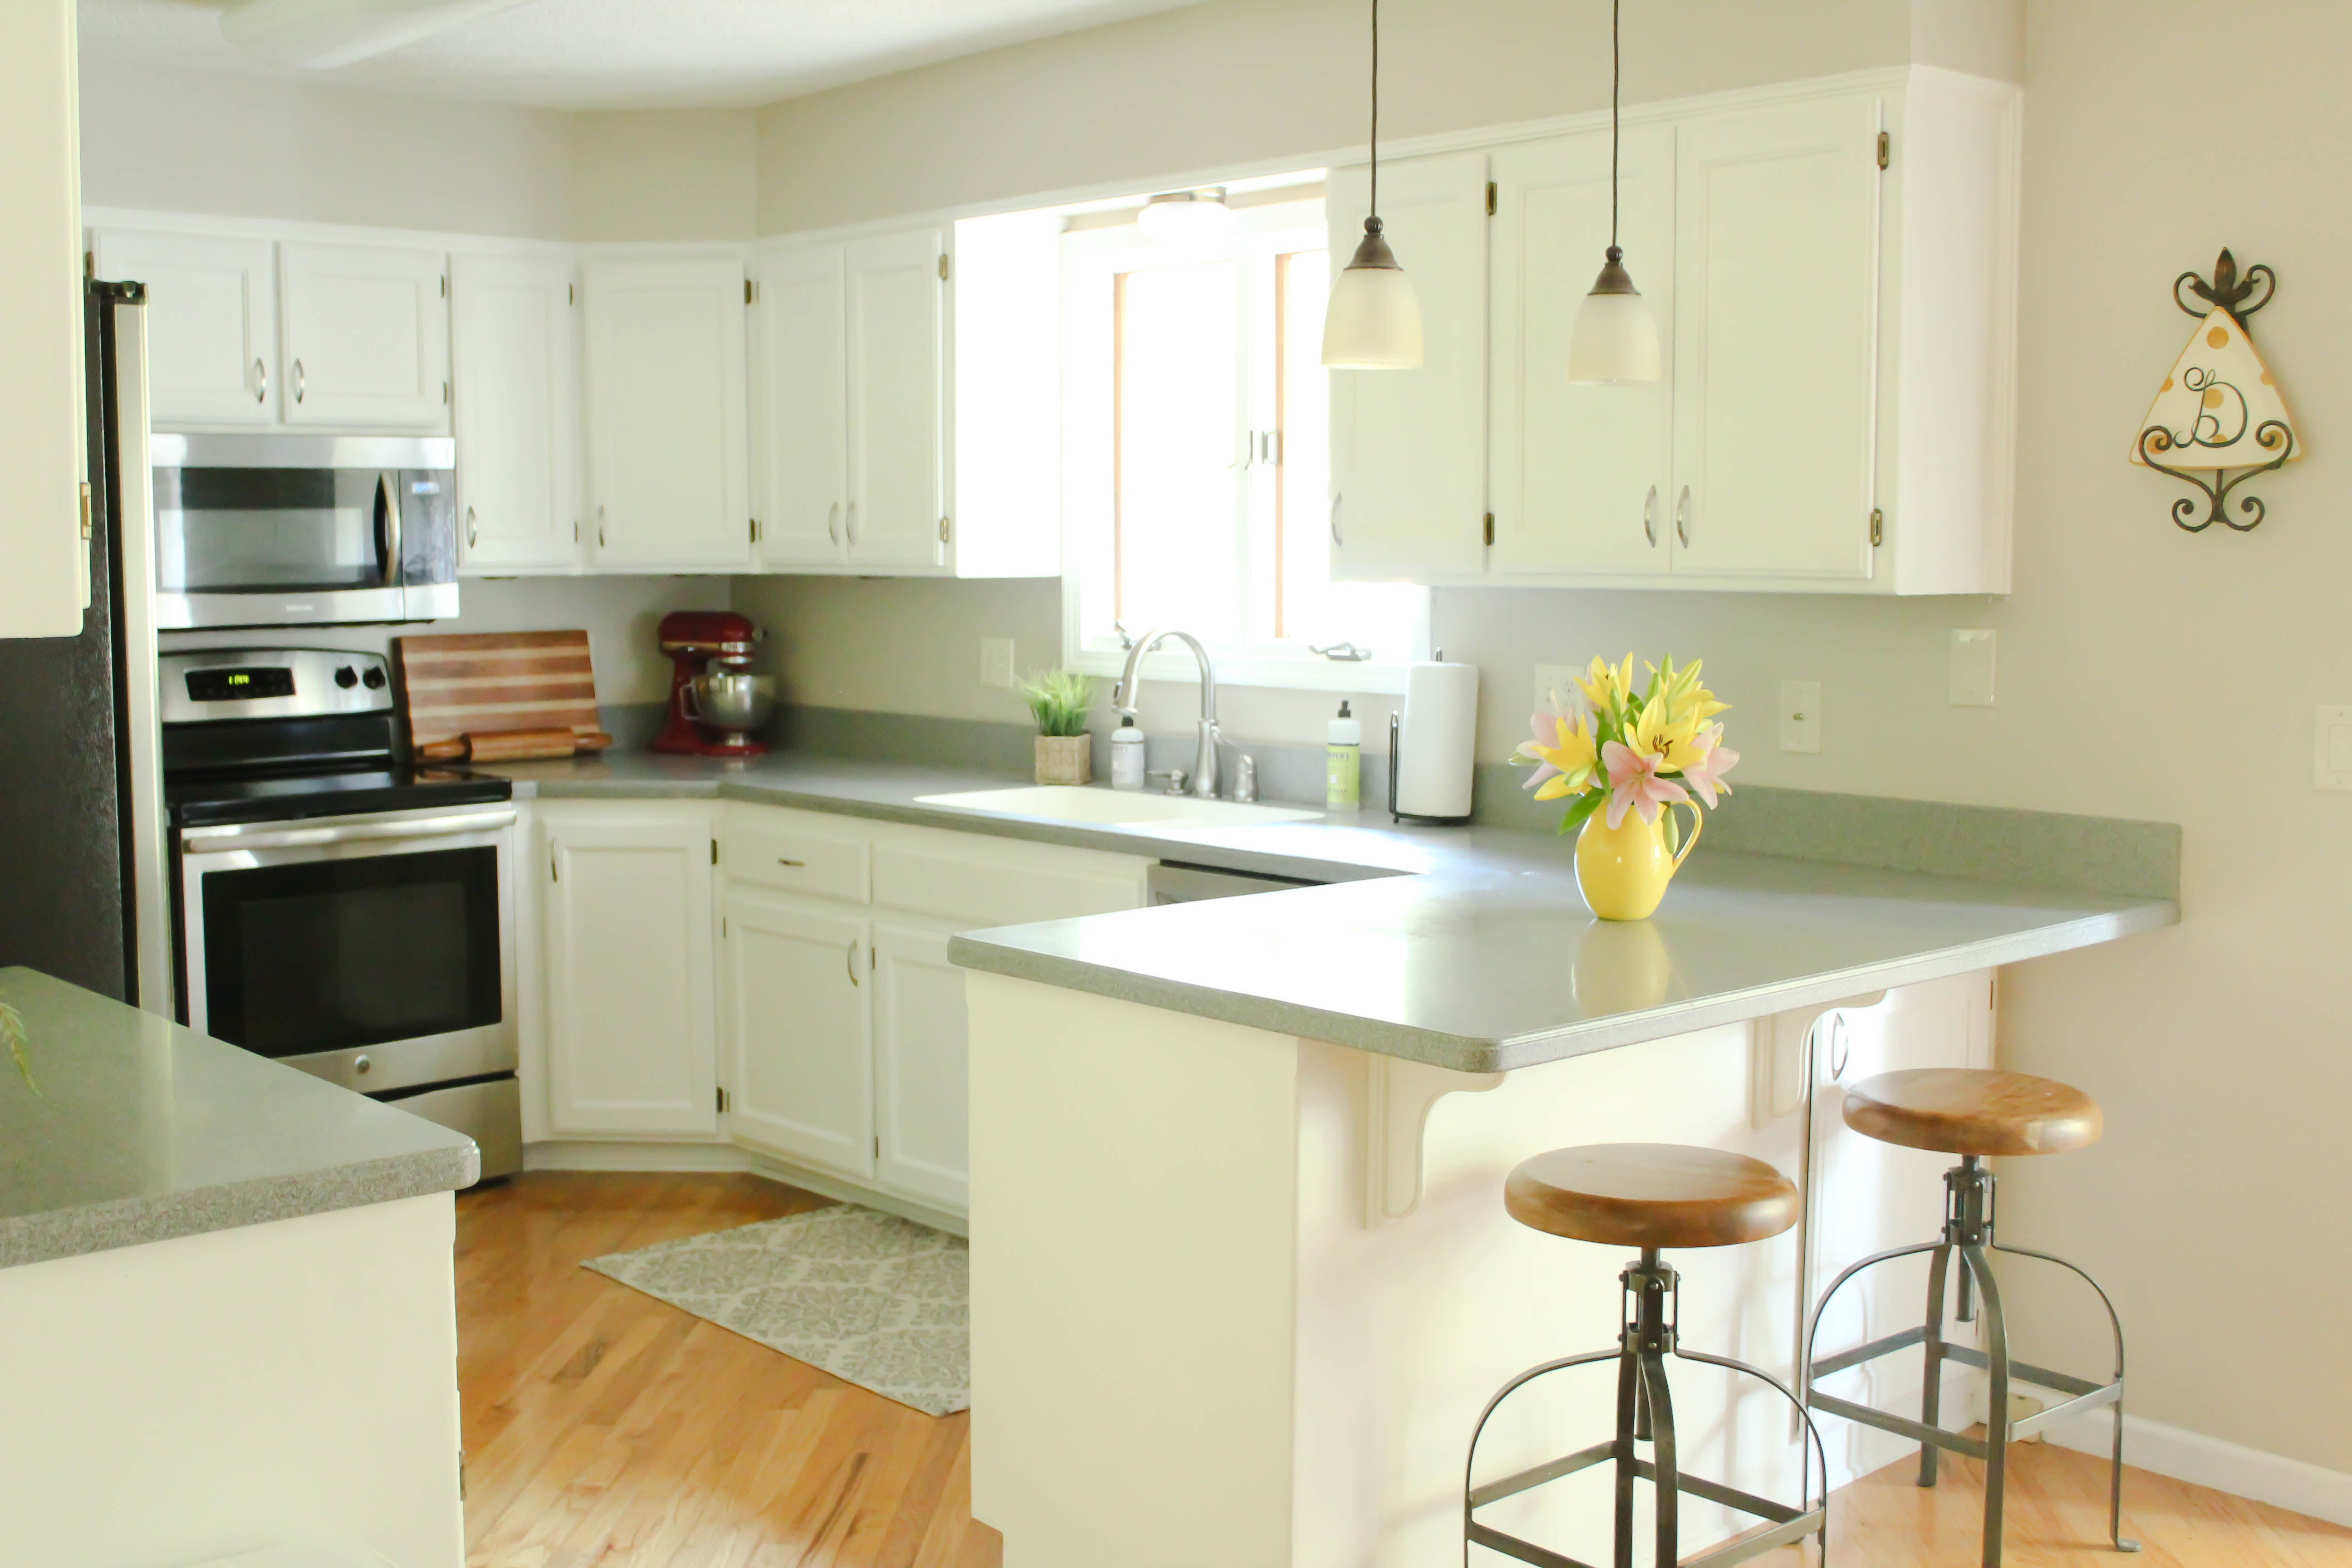 Painted Kitchen Cabinets - Chalk Paint! - Well-Groomed Home